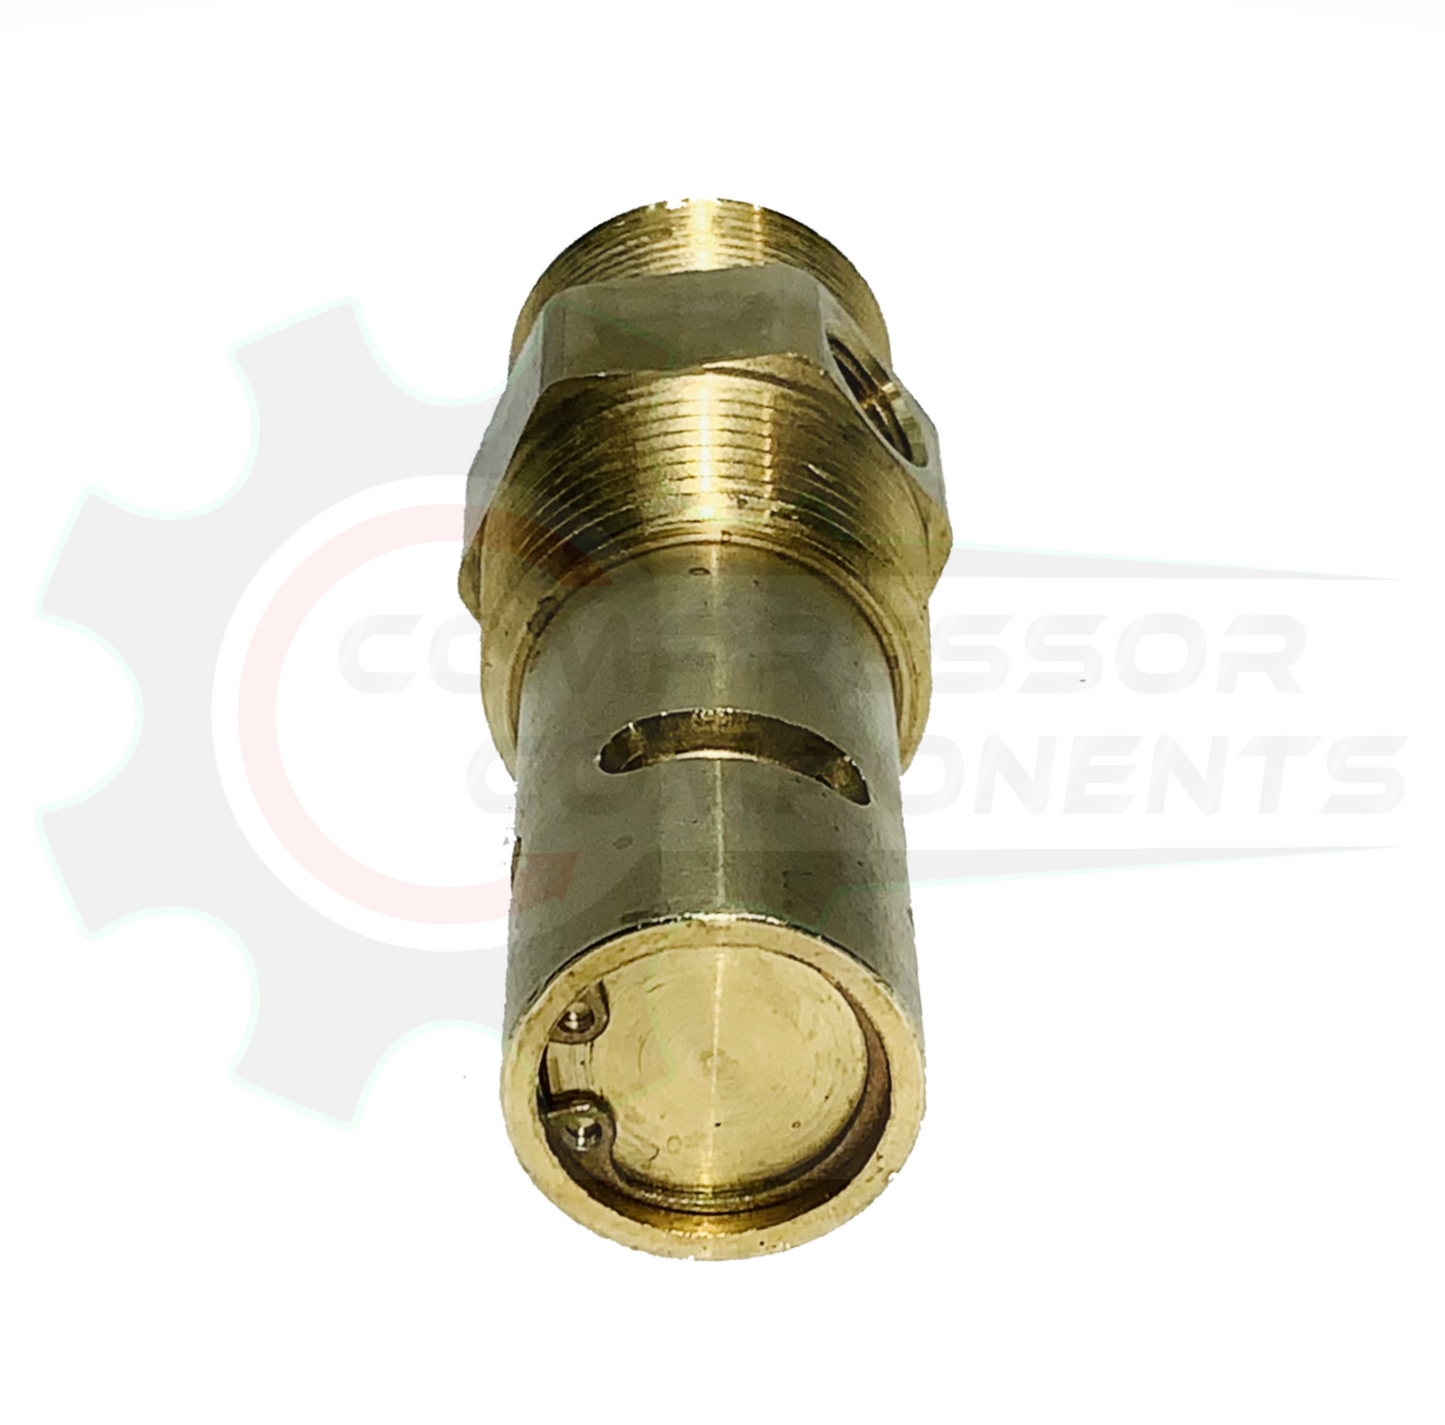 DISCHARGE IN TANK CHECK VALVE 1/2" COMPRESSION INLET x 1/2" MNPT OUTLET W\ DOUBLE 1/8" FNPT UNLOADER PORTS